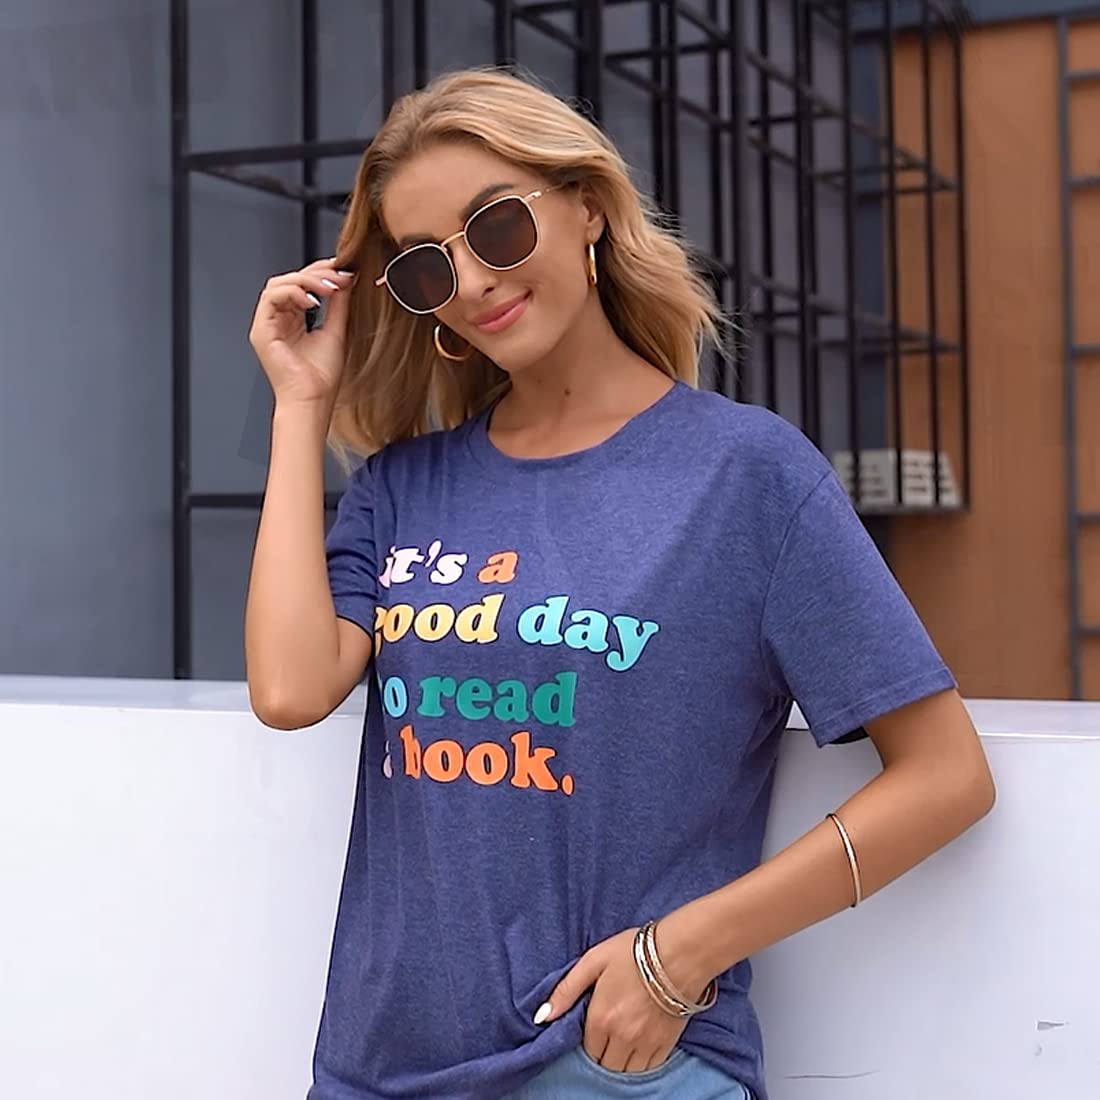 Teacher Shirts Women It's a Good Day to Read a Book Letter Print Graphic Tee Reading Book Shirt Book Lovers Gift Tops